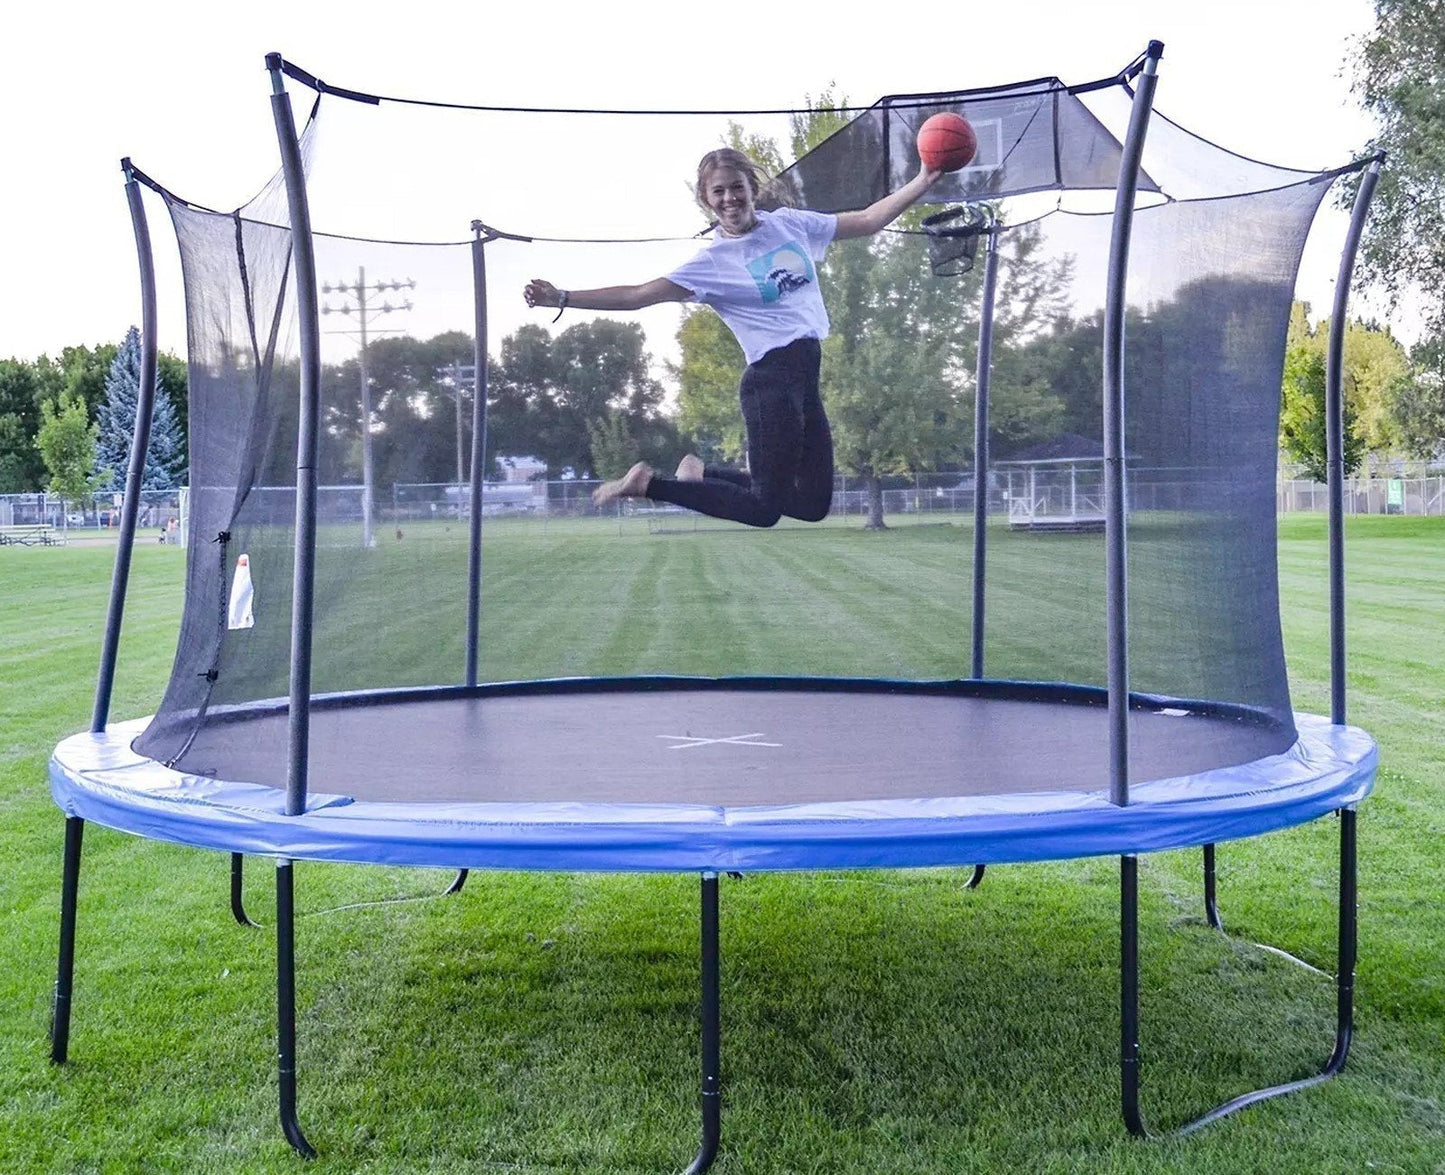 Propel Round 14' Trampoline with Basketball Goal & Safety Enclosure 96 Spring